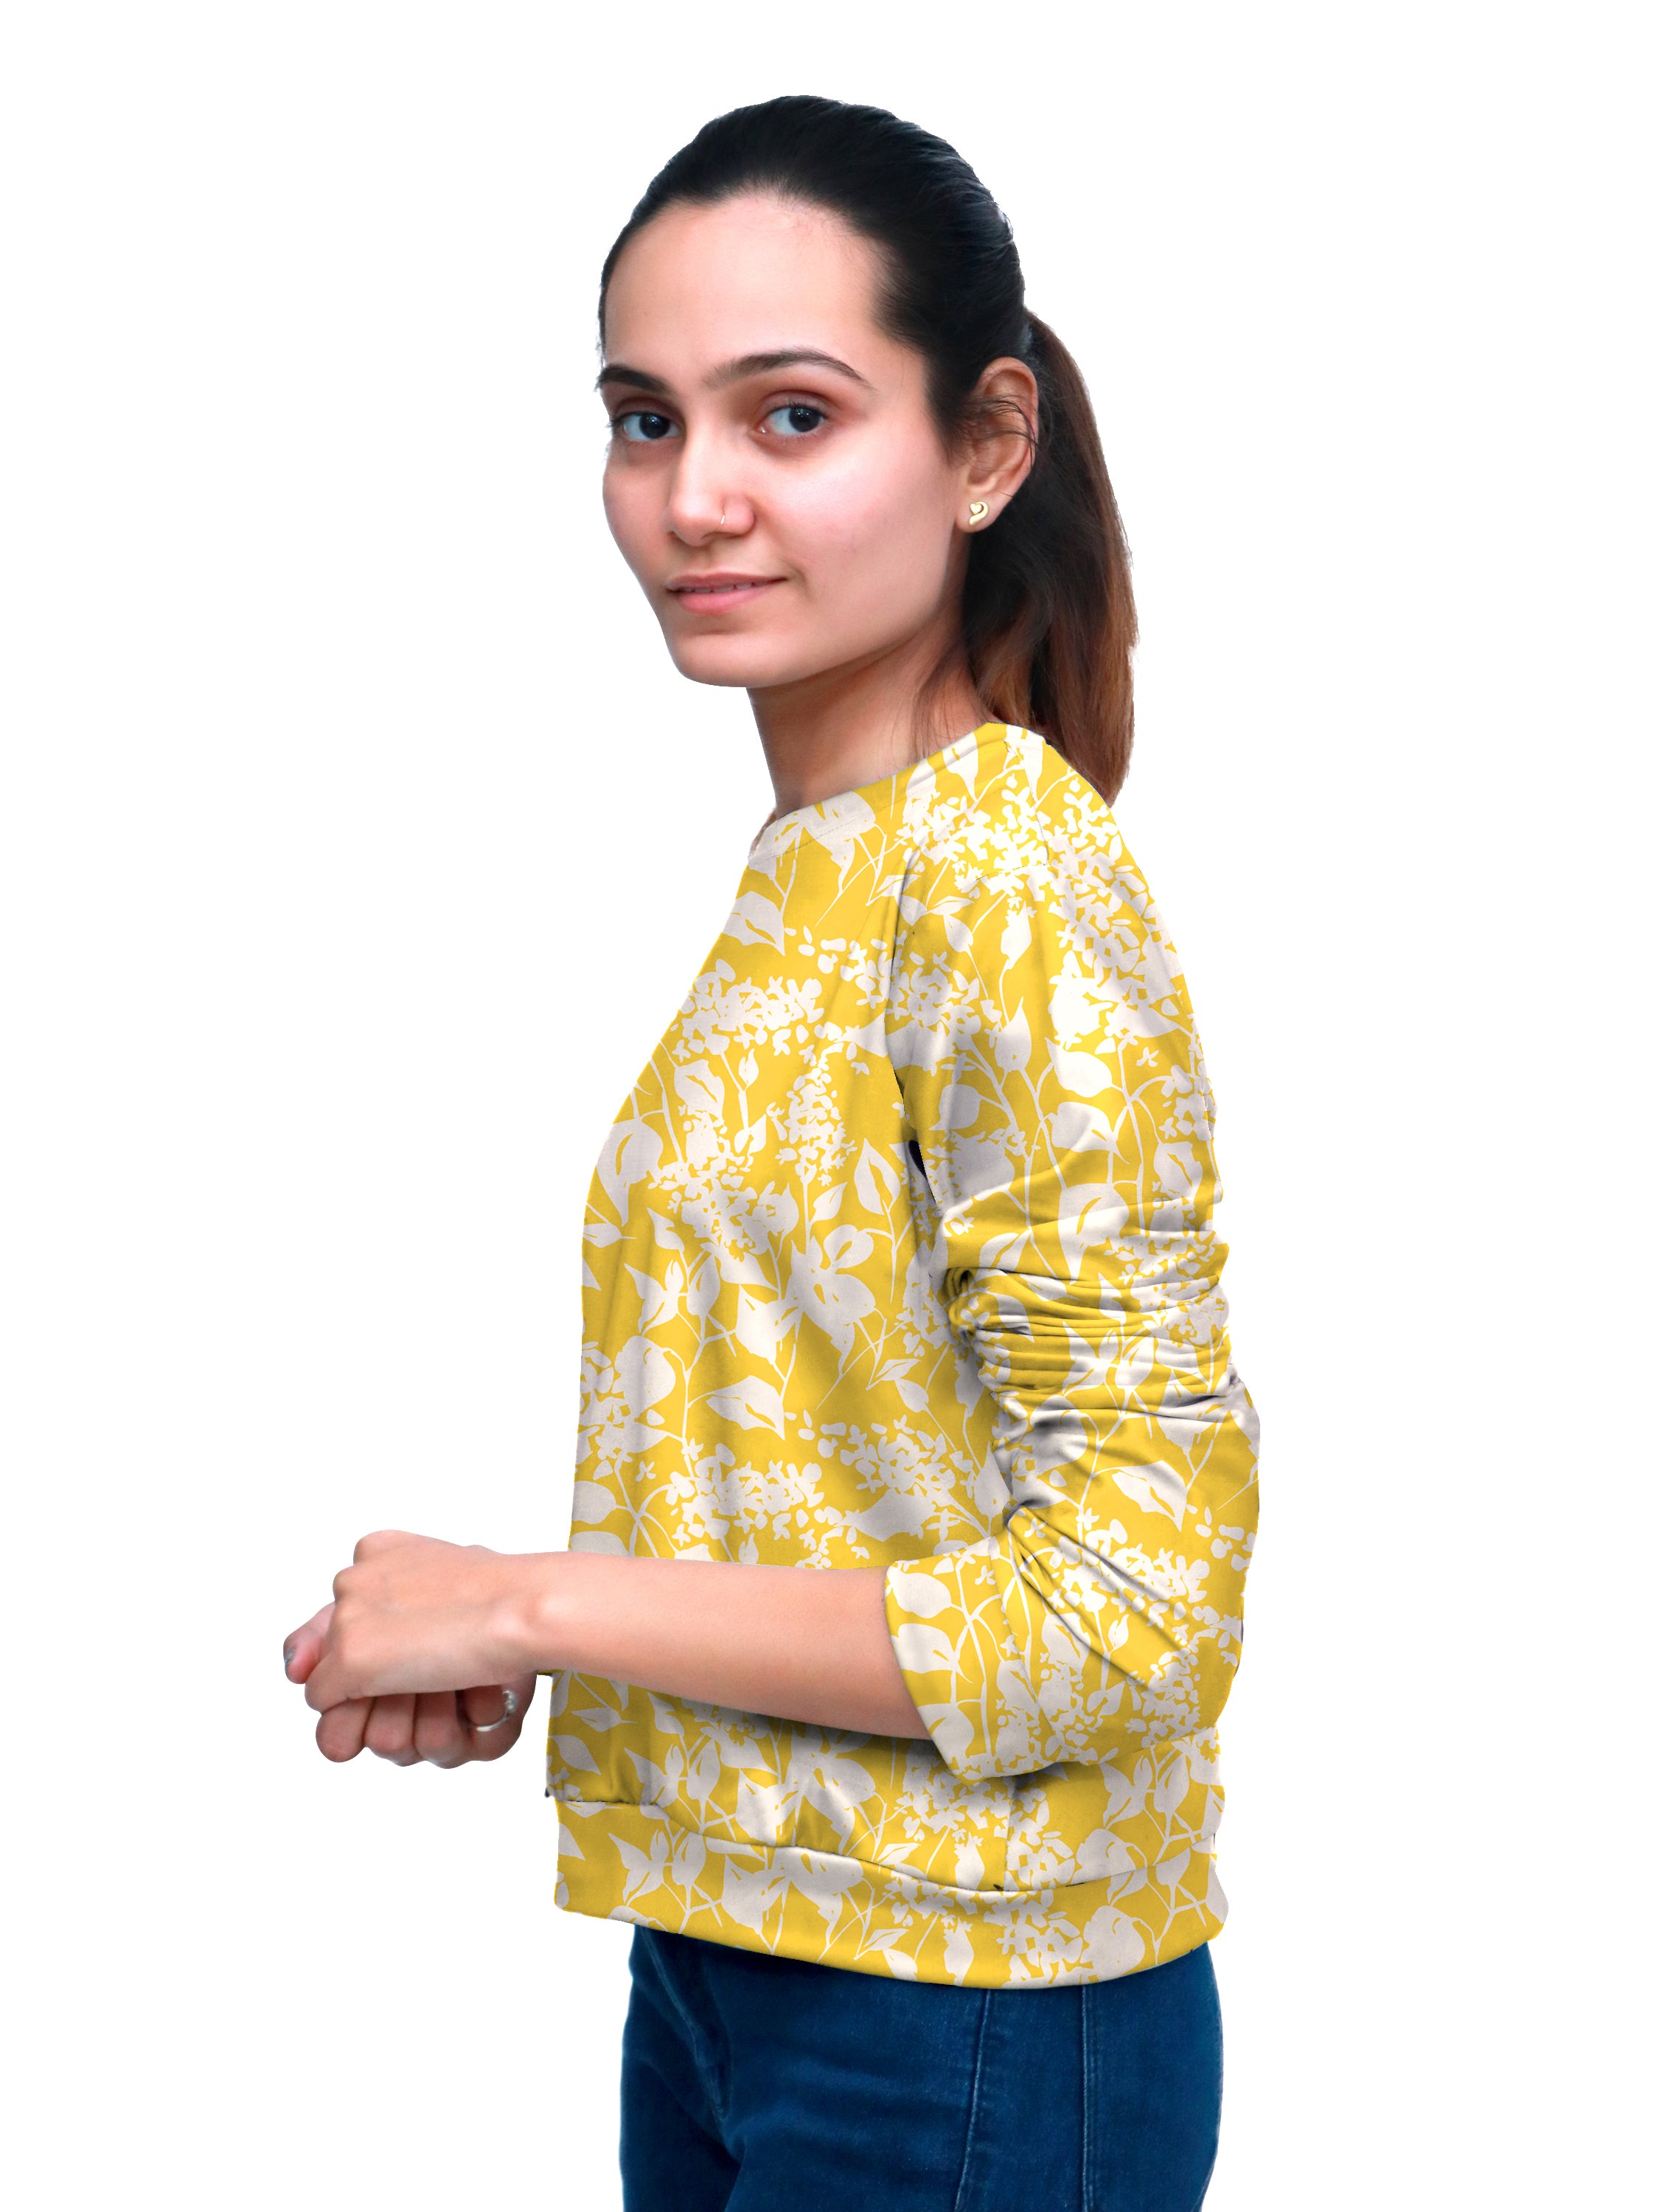 Yellow Women Full Sleeve Top With White Blossom Printed